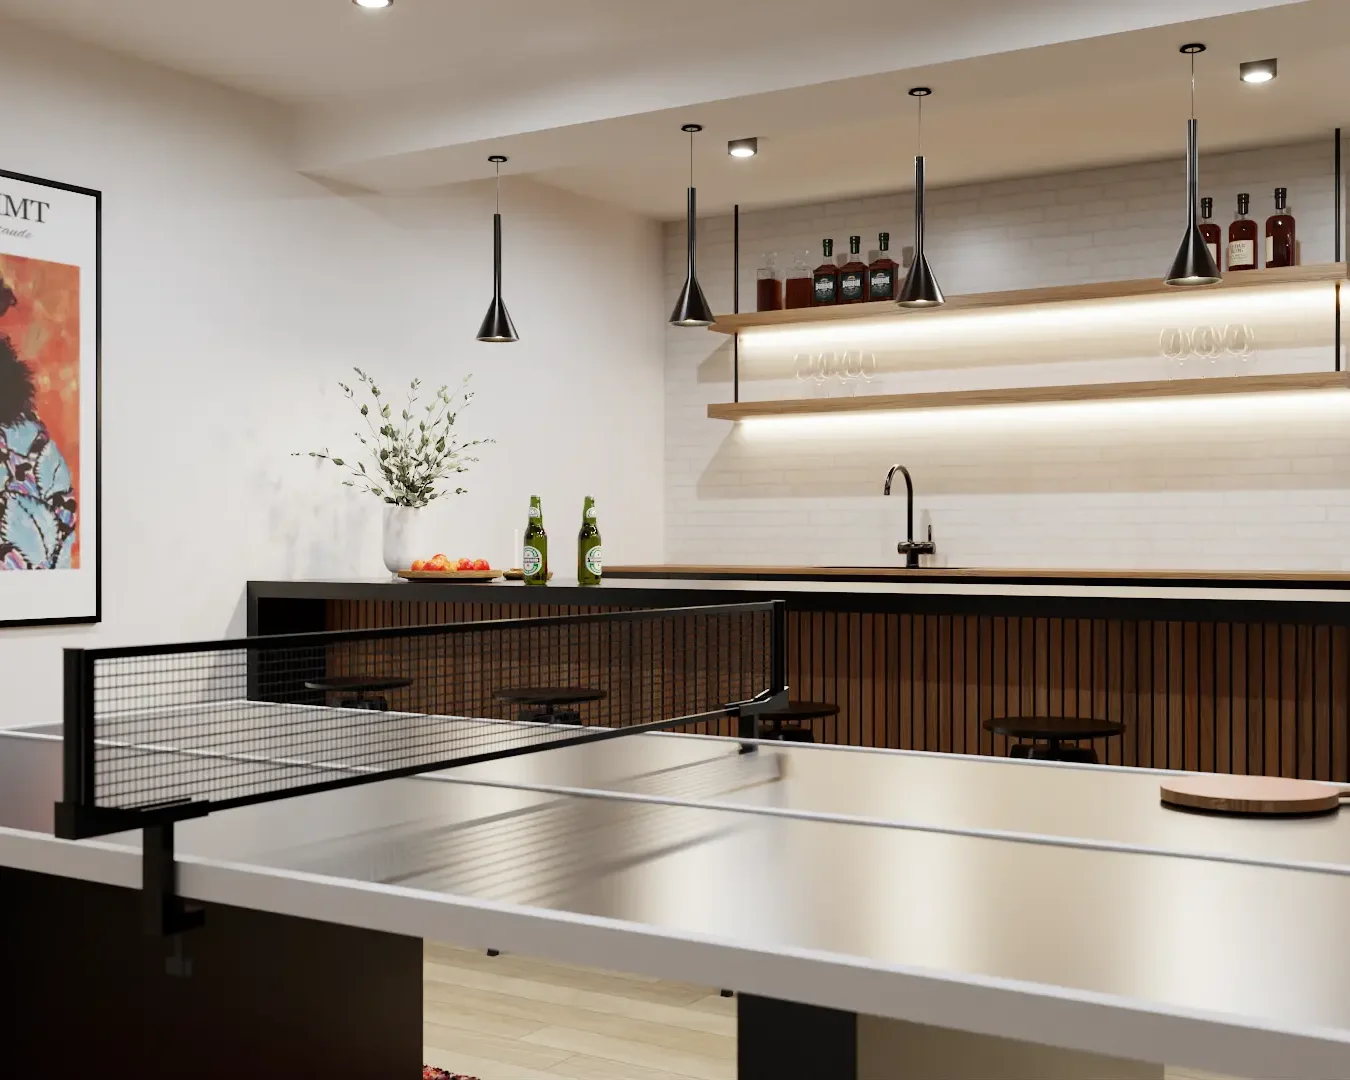 A contemporary ping pong room featuring a sleek bar with modern lighting, open shelving, and a Gustav Klimt poster on the wall. The space is designed for fun and entertainment. Design by Debora, an online interior design service.